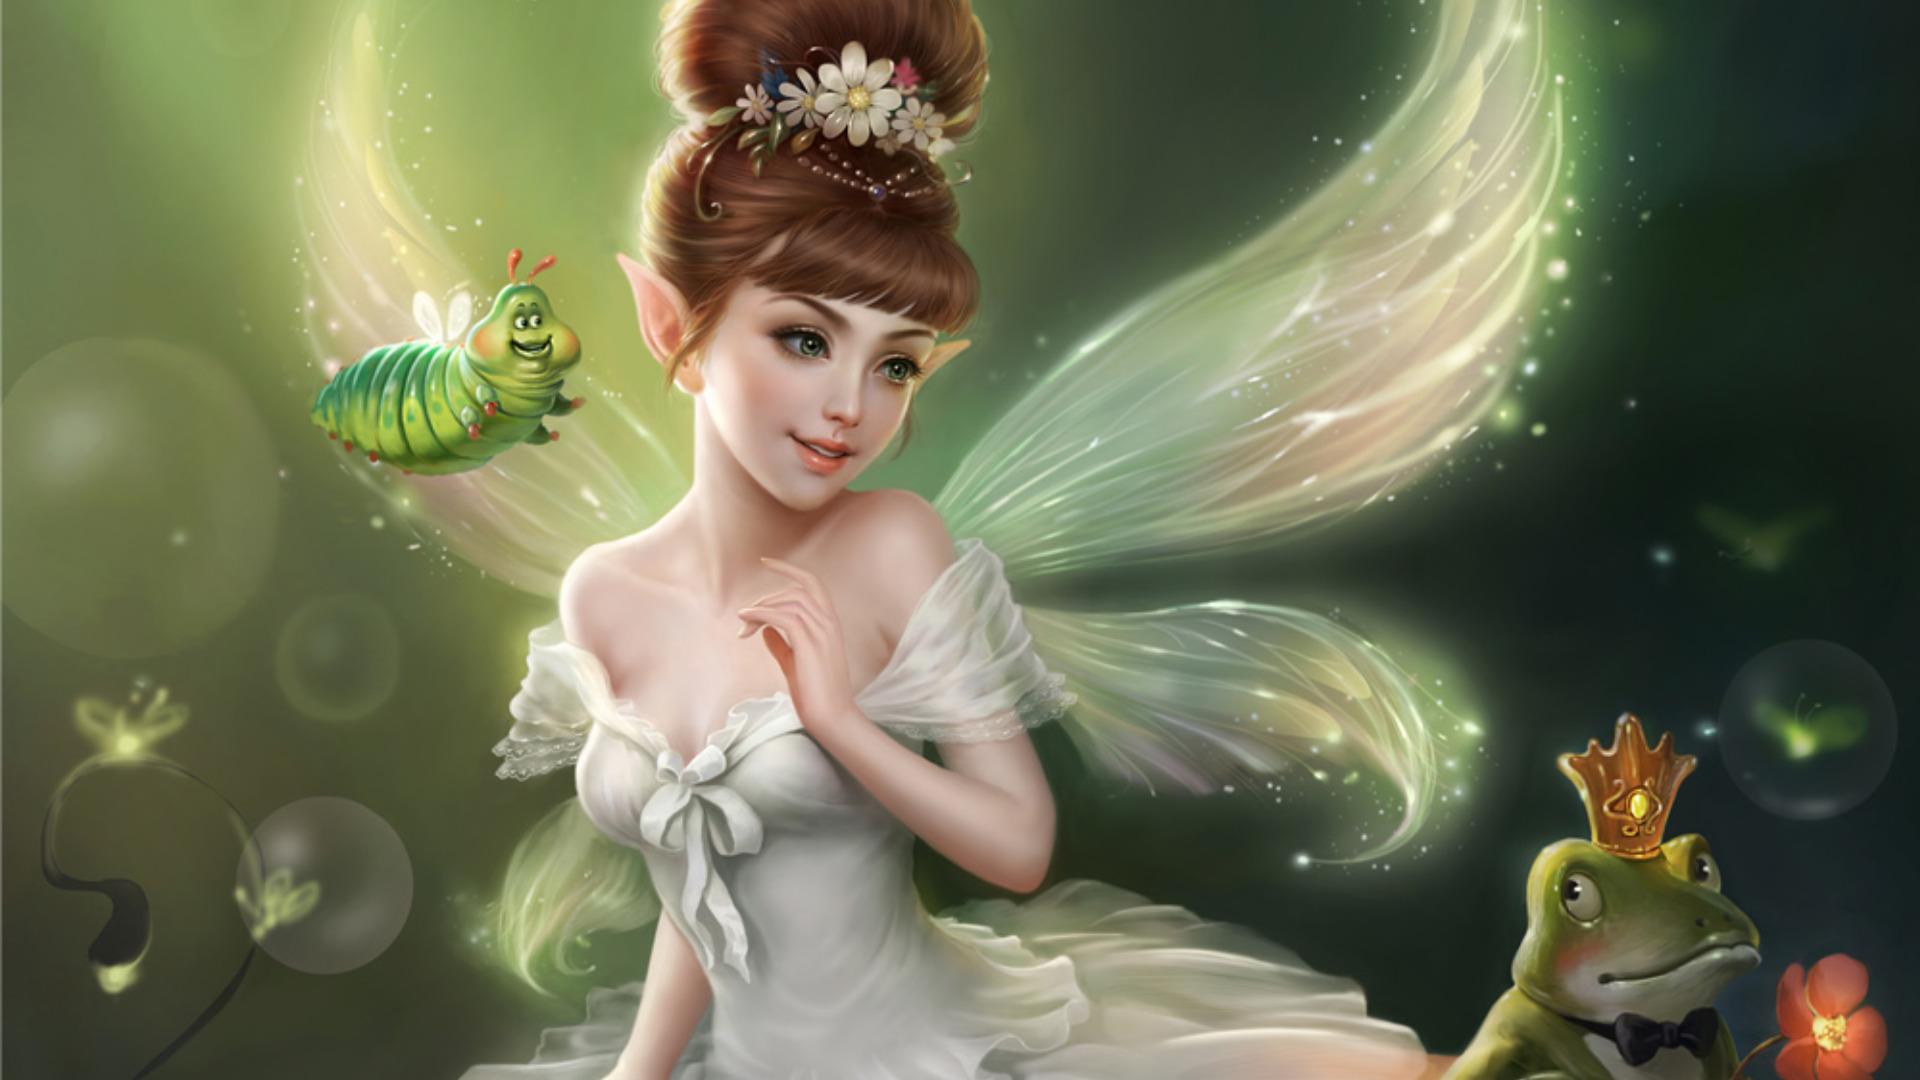 Ethereal Pixie Wallpaper. Tinkerbell Pixie